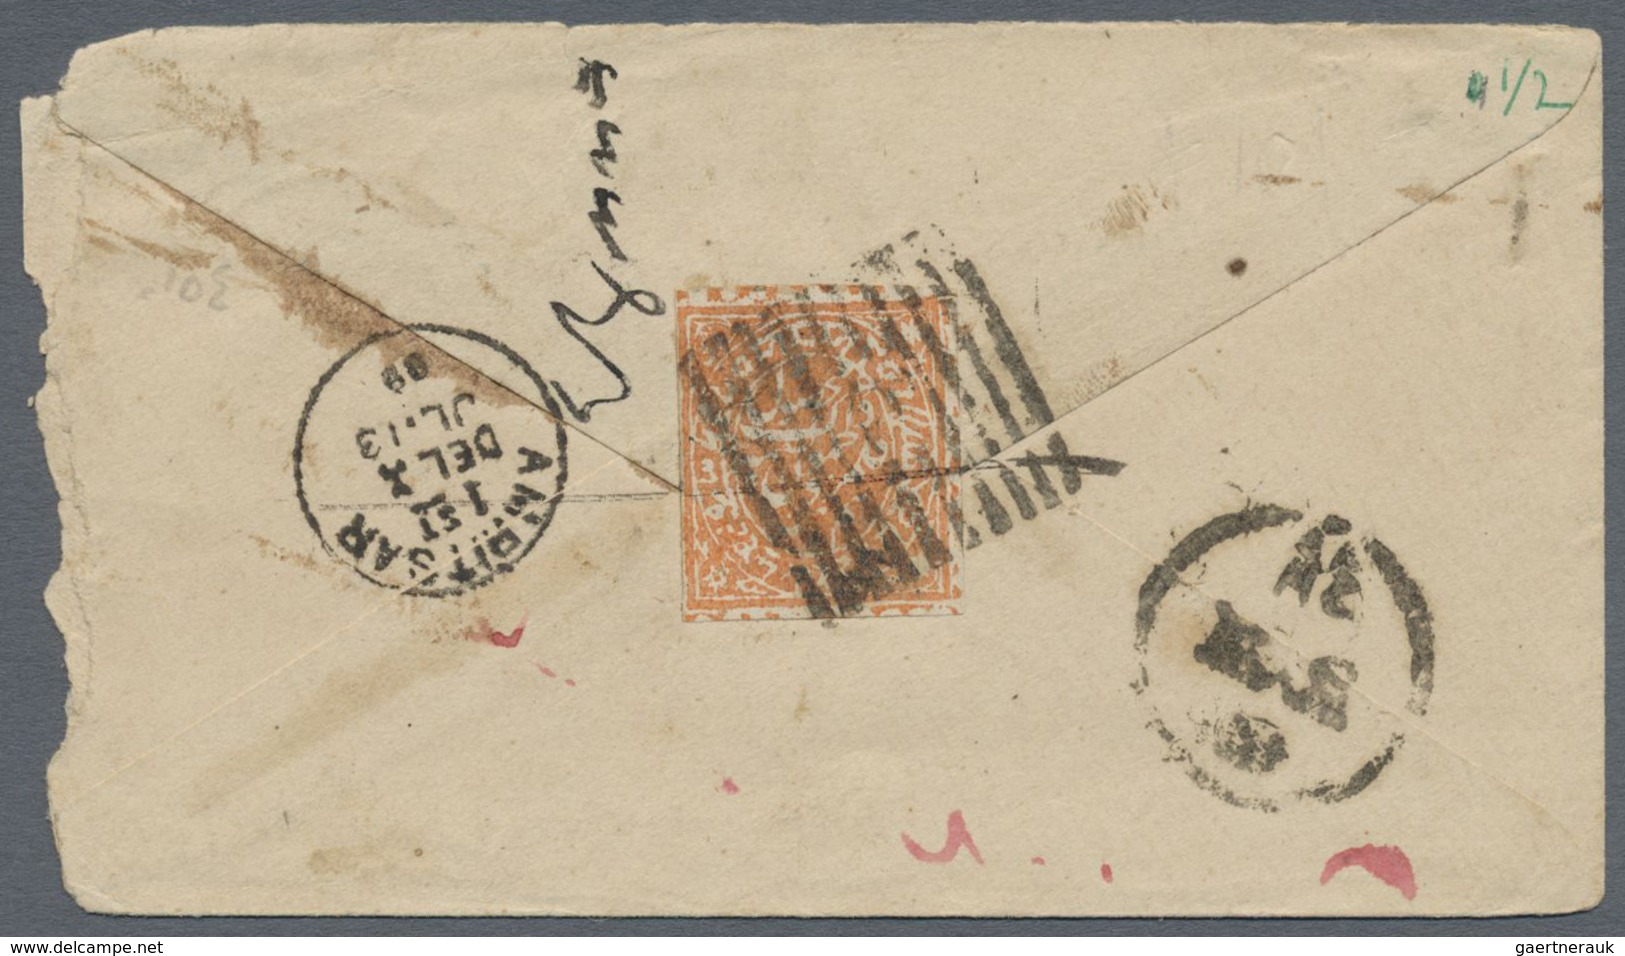 GA/Br/Brfst/O Indien - Feudalstaaten: JAMMU & KASHMIR 1860's-80's: Group of 10 covers and three stamps, with J&K-B